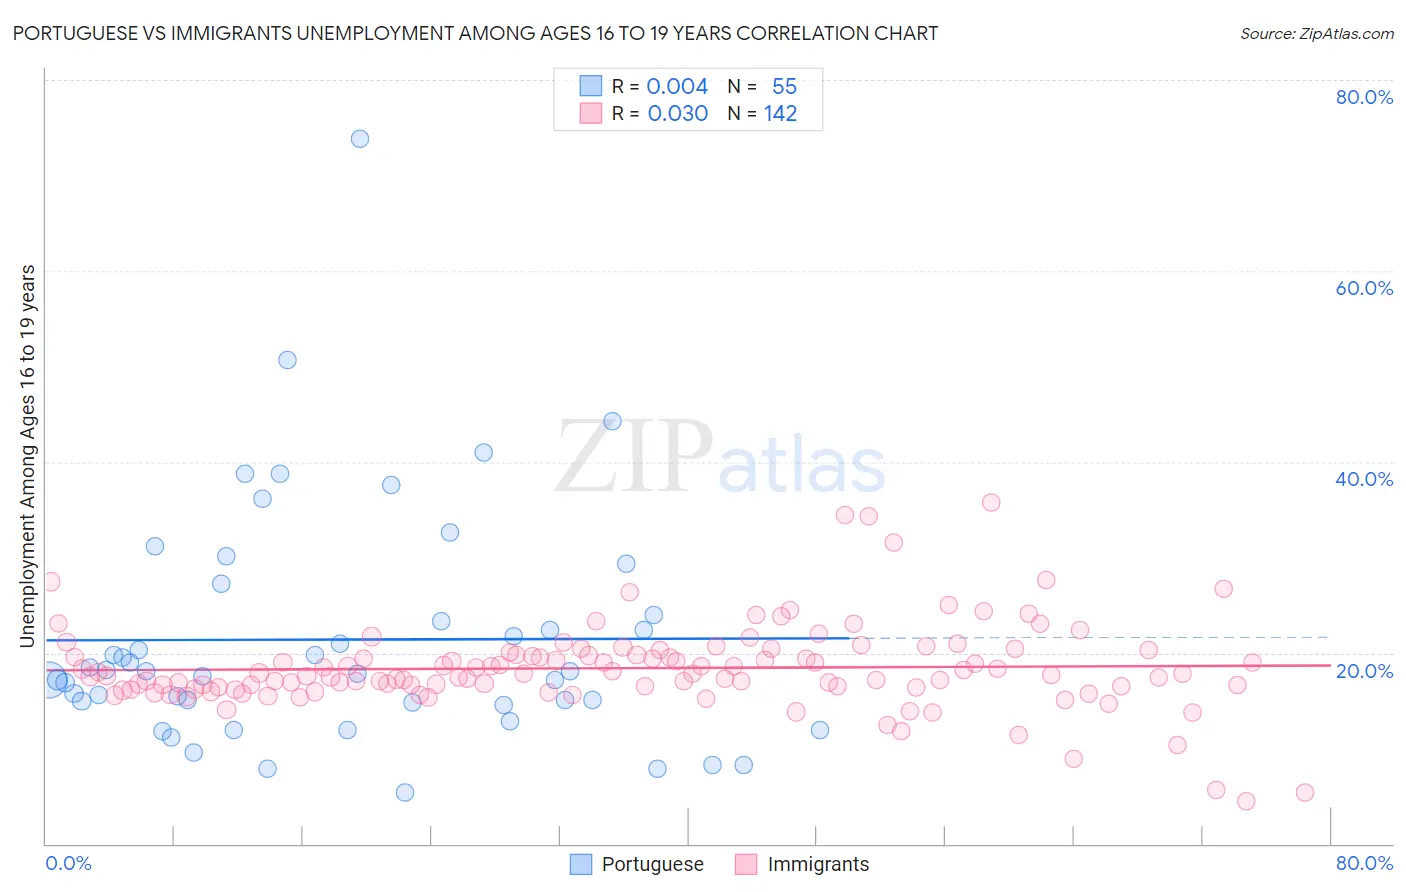 Portuguese vs Immigrants Unemployment Among Ages 16 to 19 years